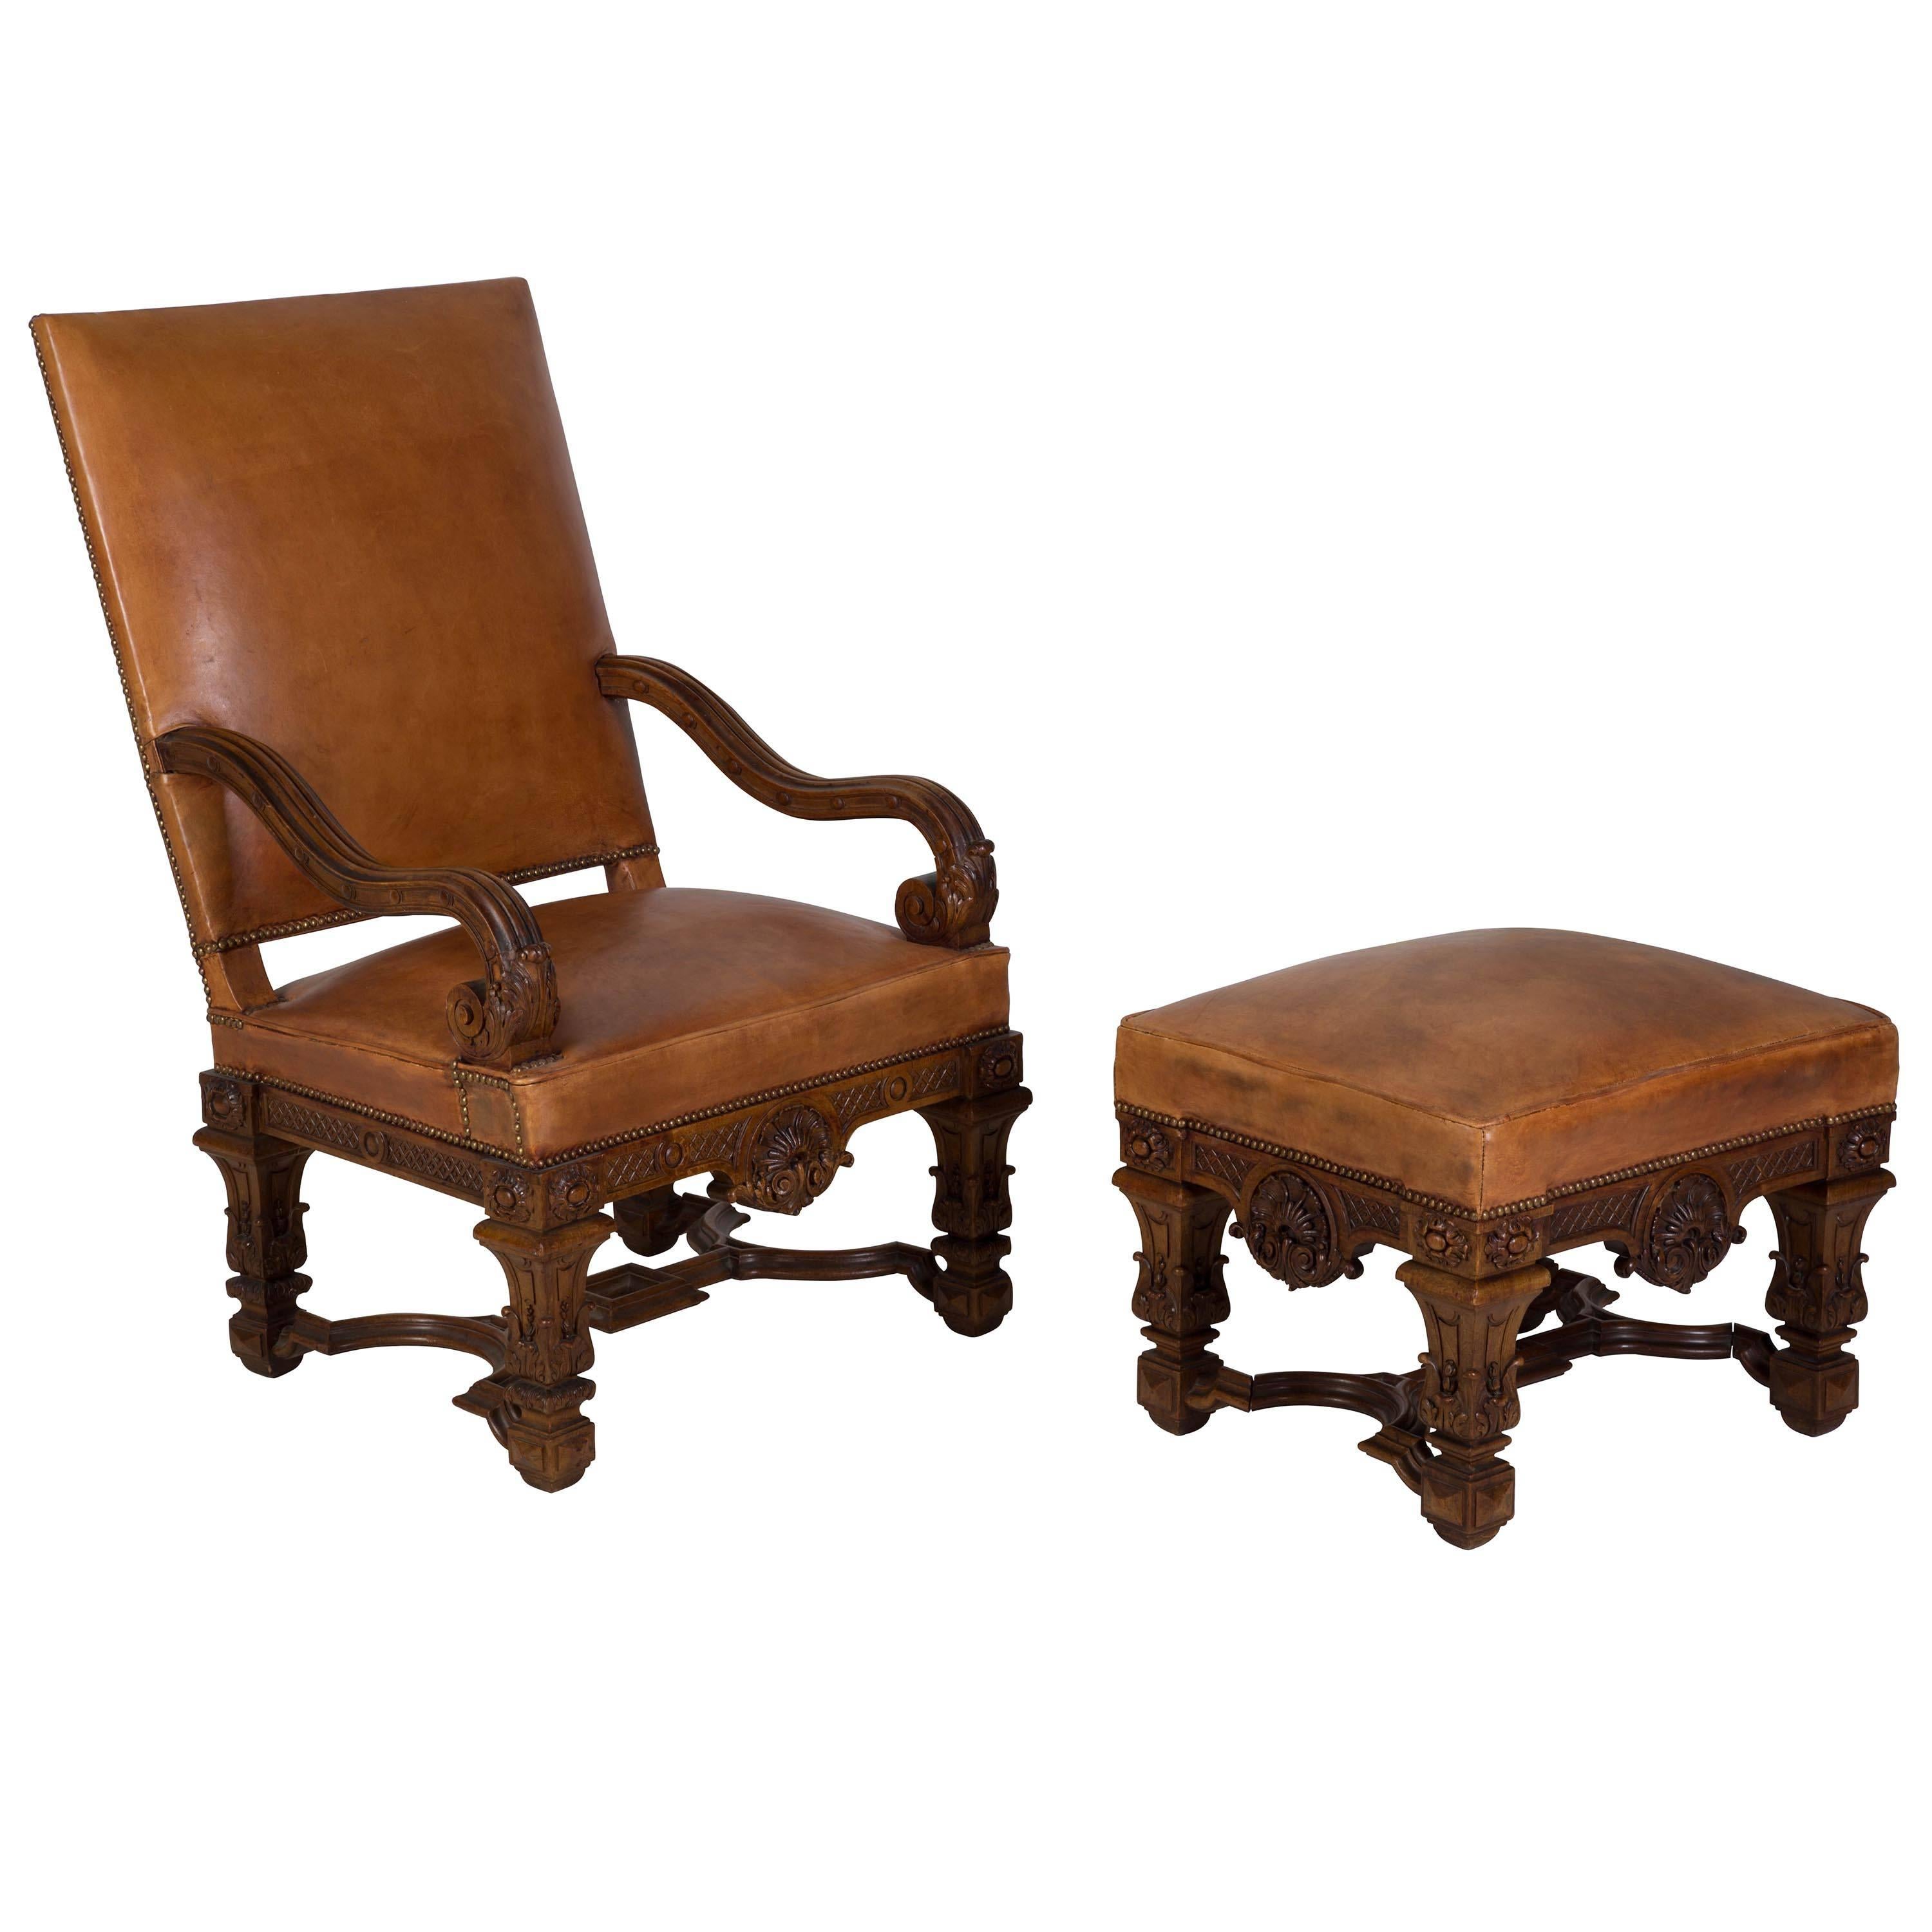 19th Century French Chair and Ottoman